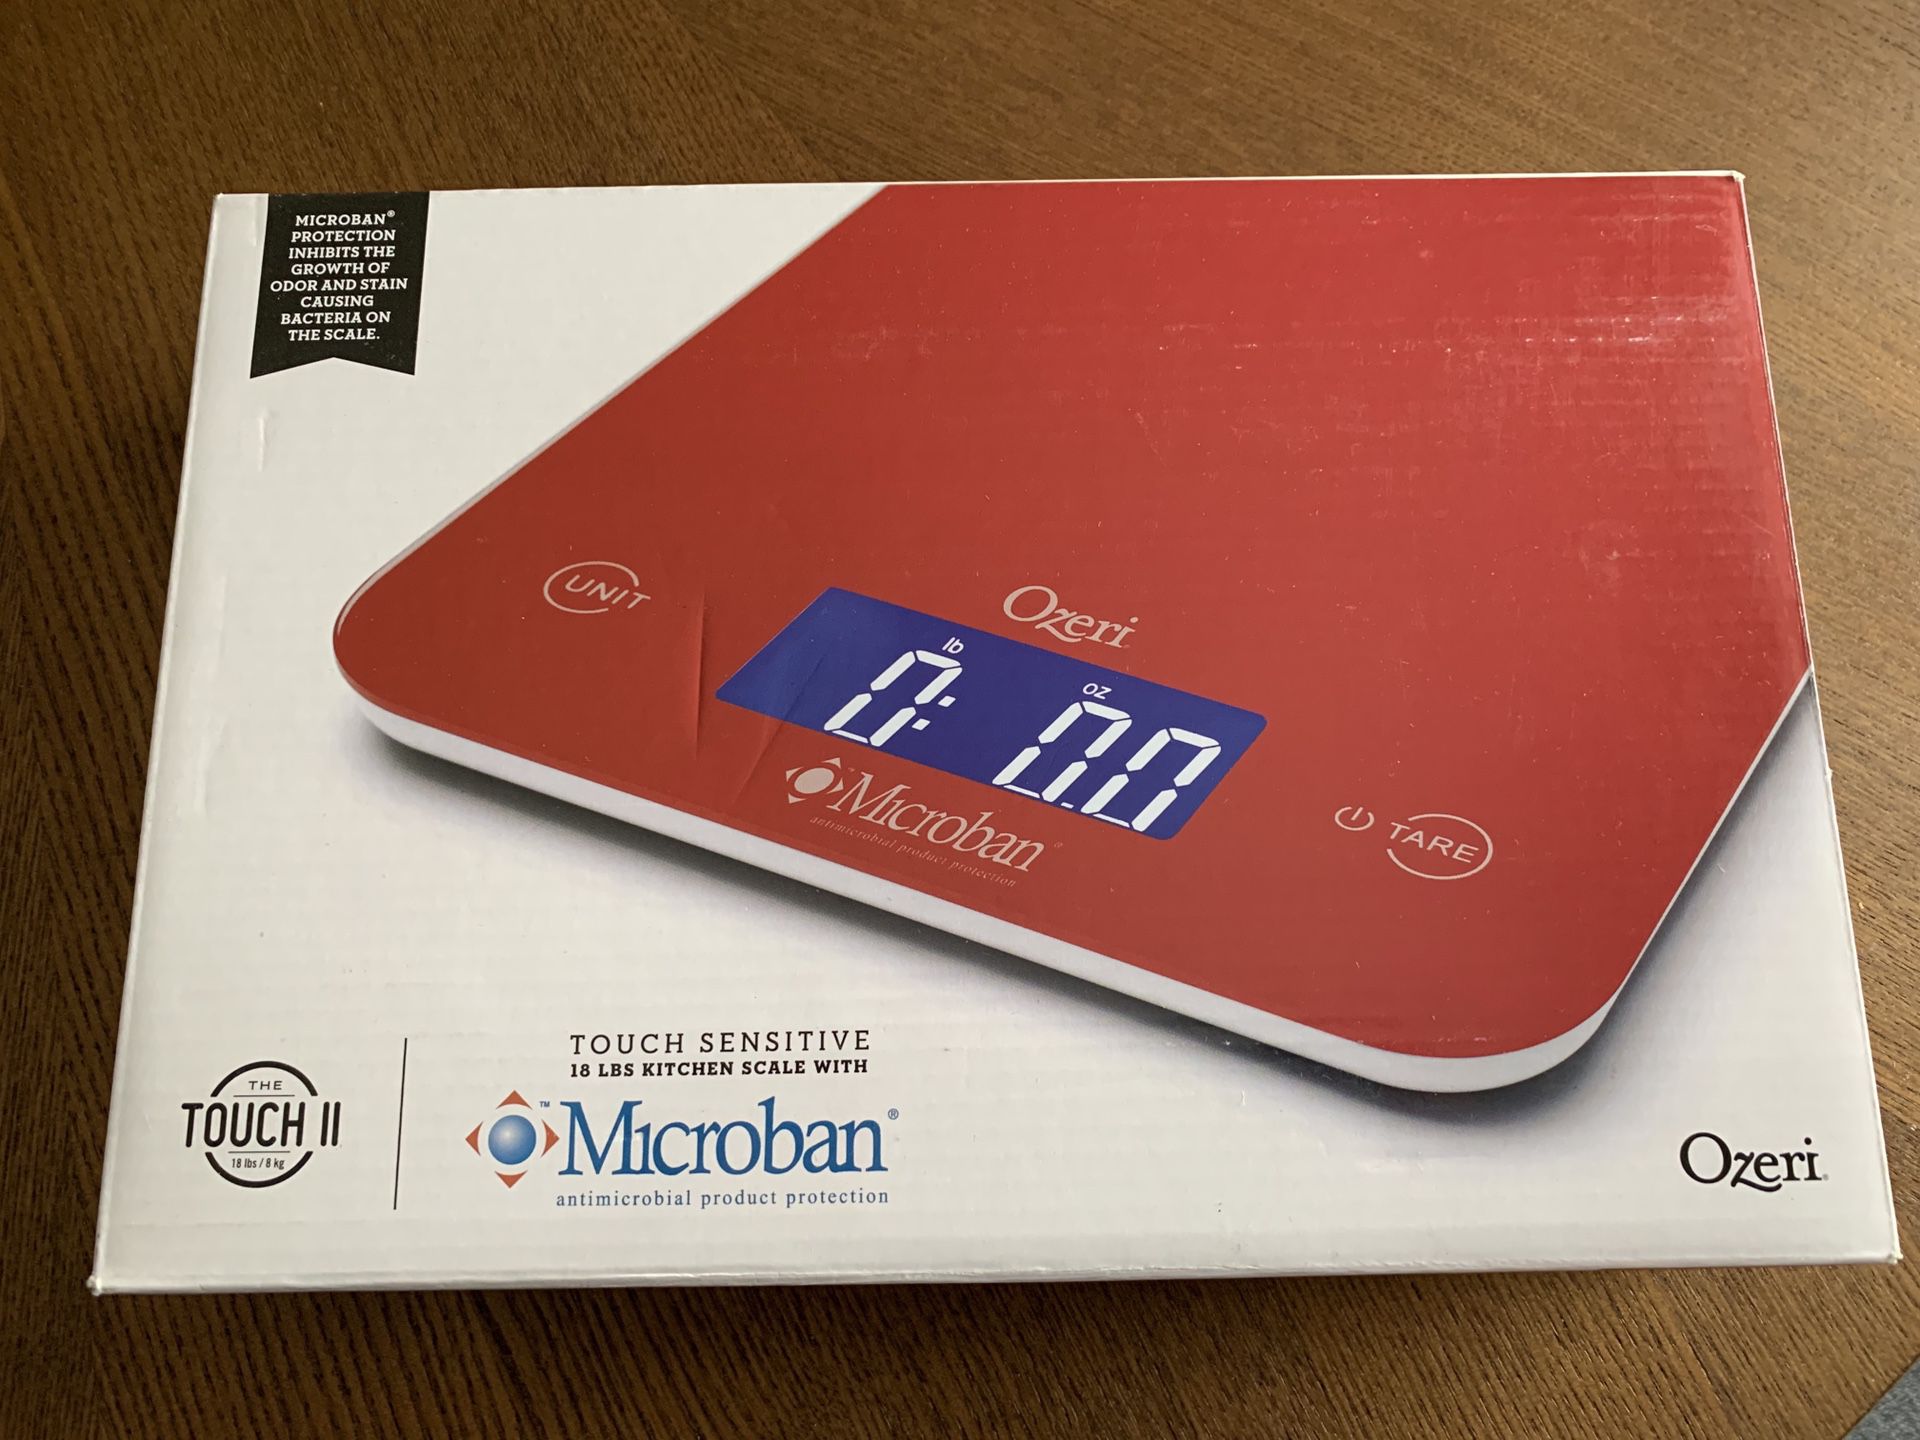 Ozeri Touch II kitchen scale with Antimicrobial Protection - Brand new